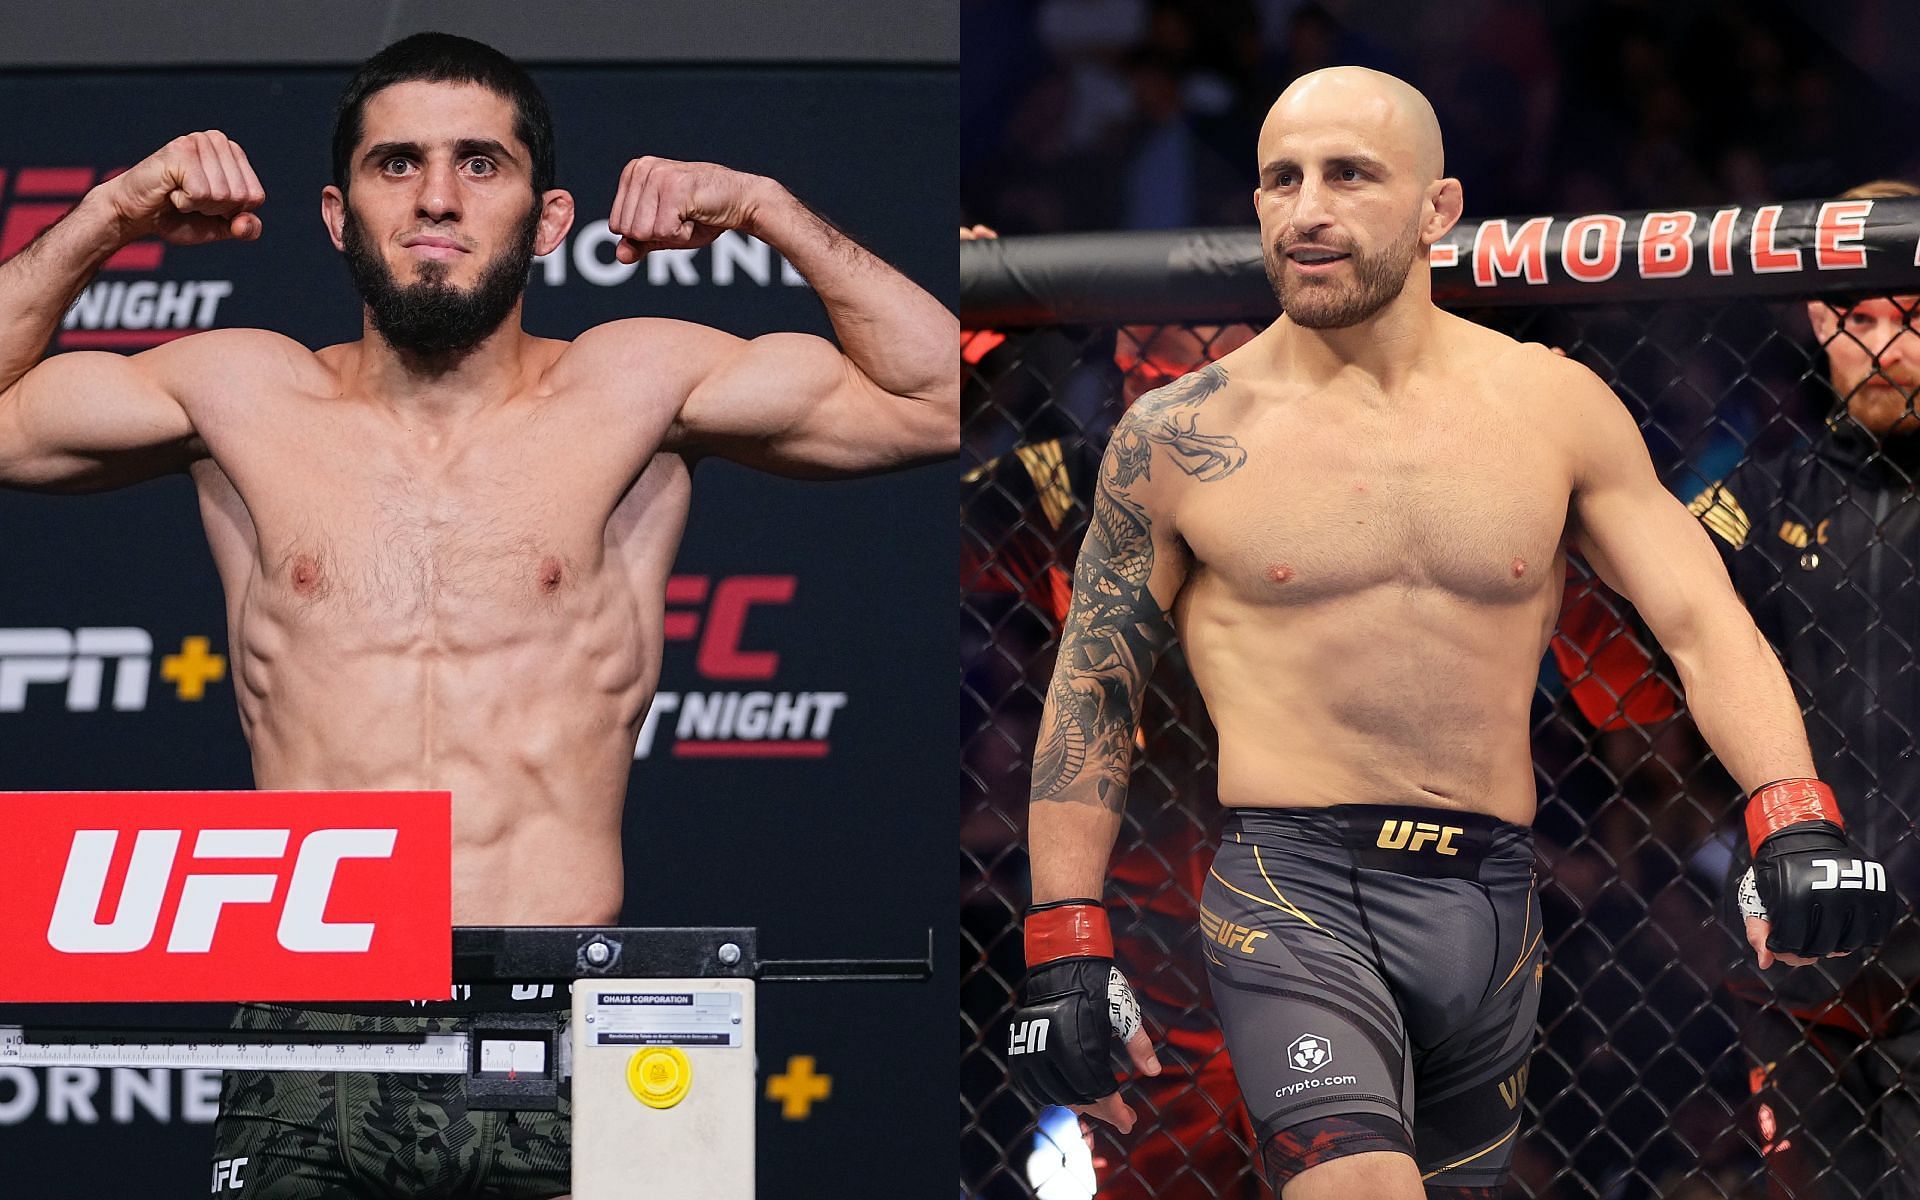 Islam Makhachev (left) and Alexander Volkanovski (right) [Image Courtesy: Getty Images]